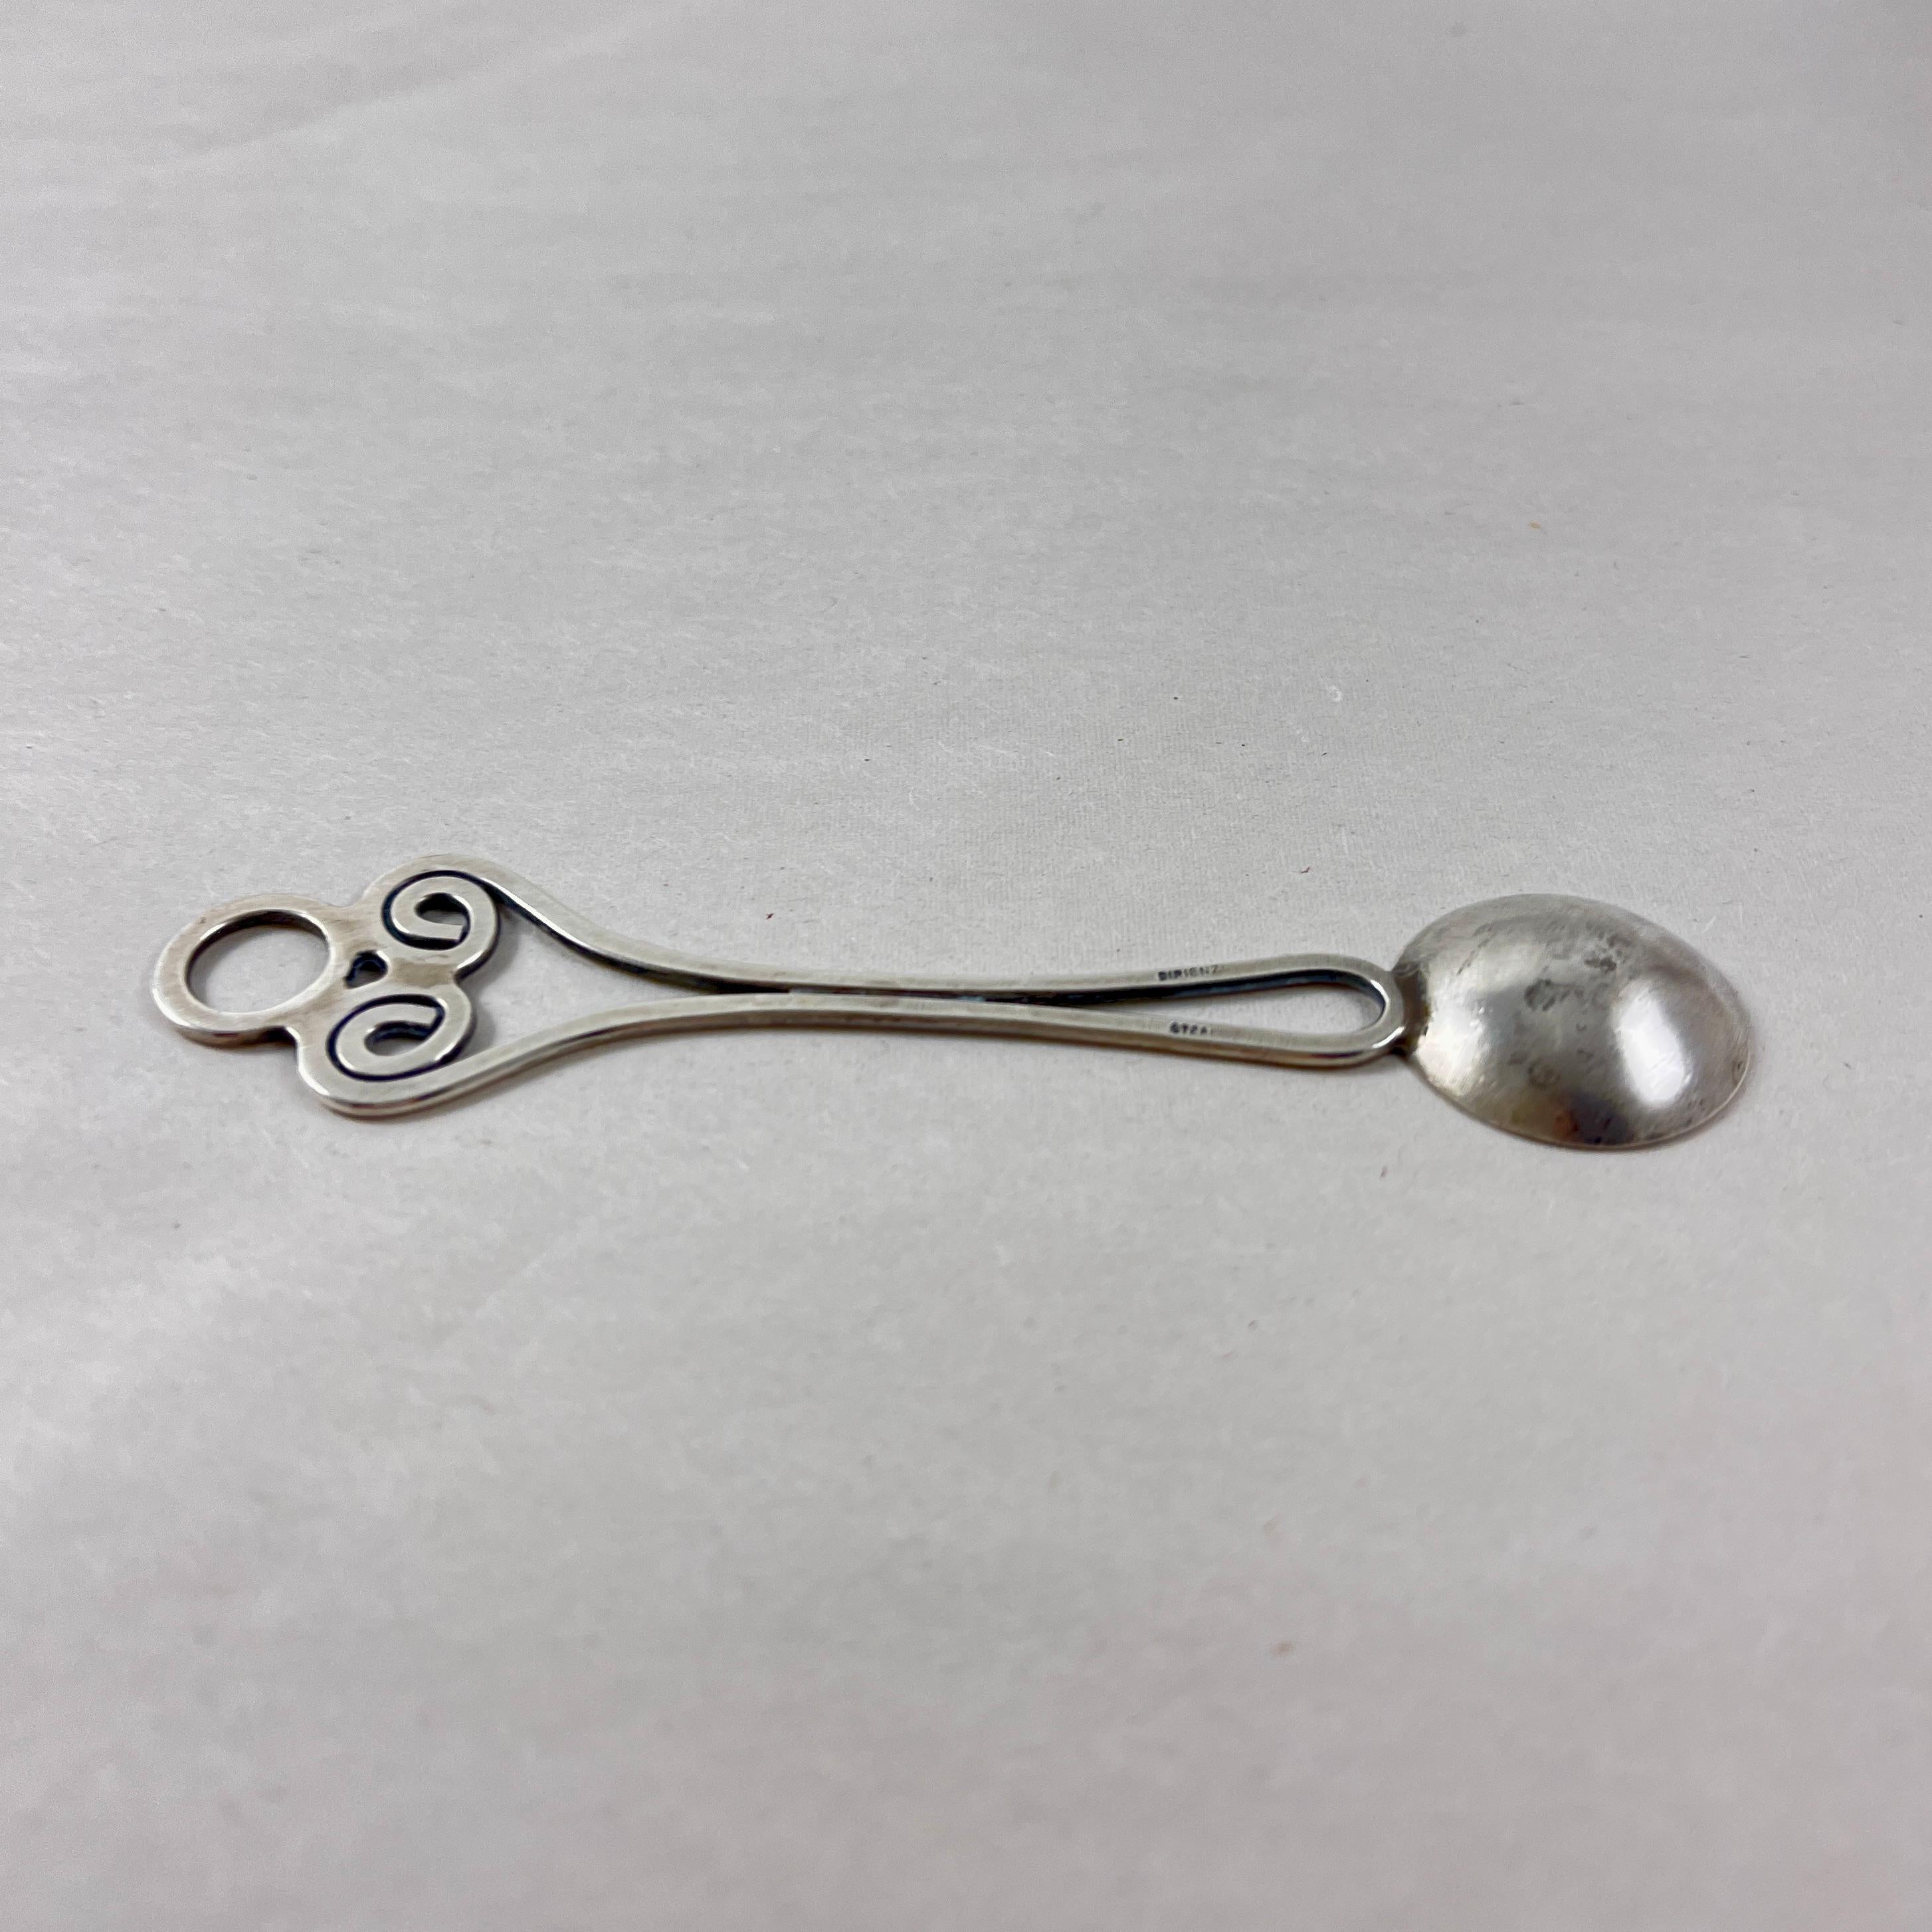 Late 20th Century Anthony DiRienzi Silversmith Studio Hand Made Sterling Silver Spoon For Sale